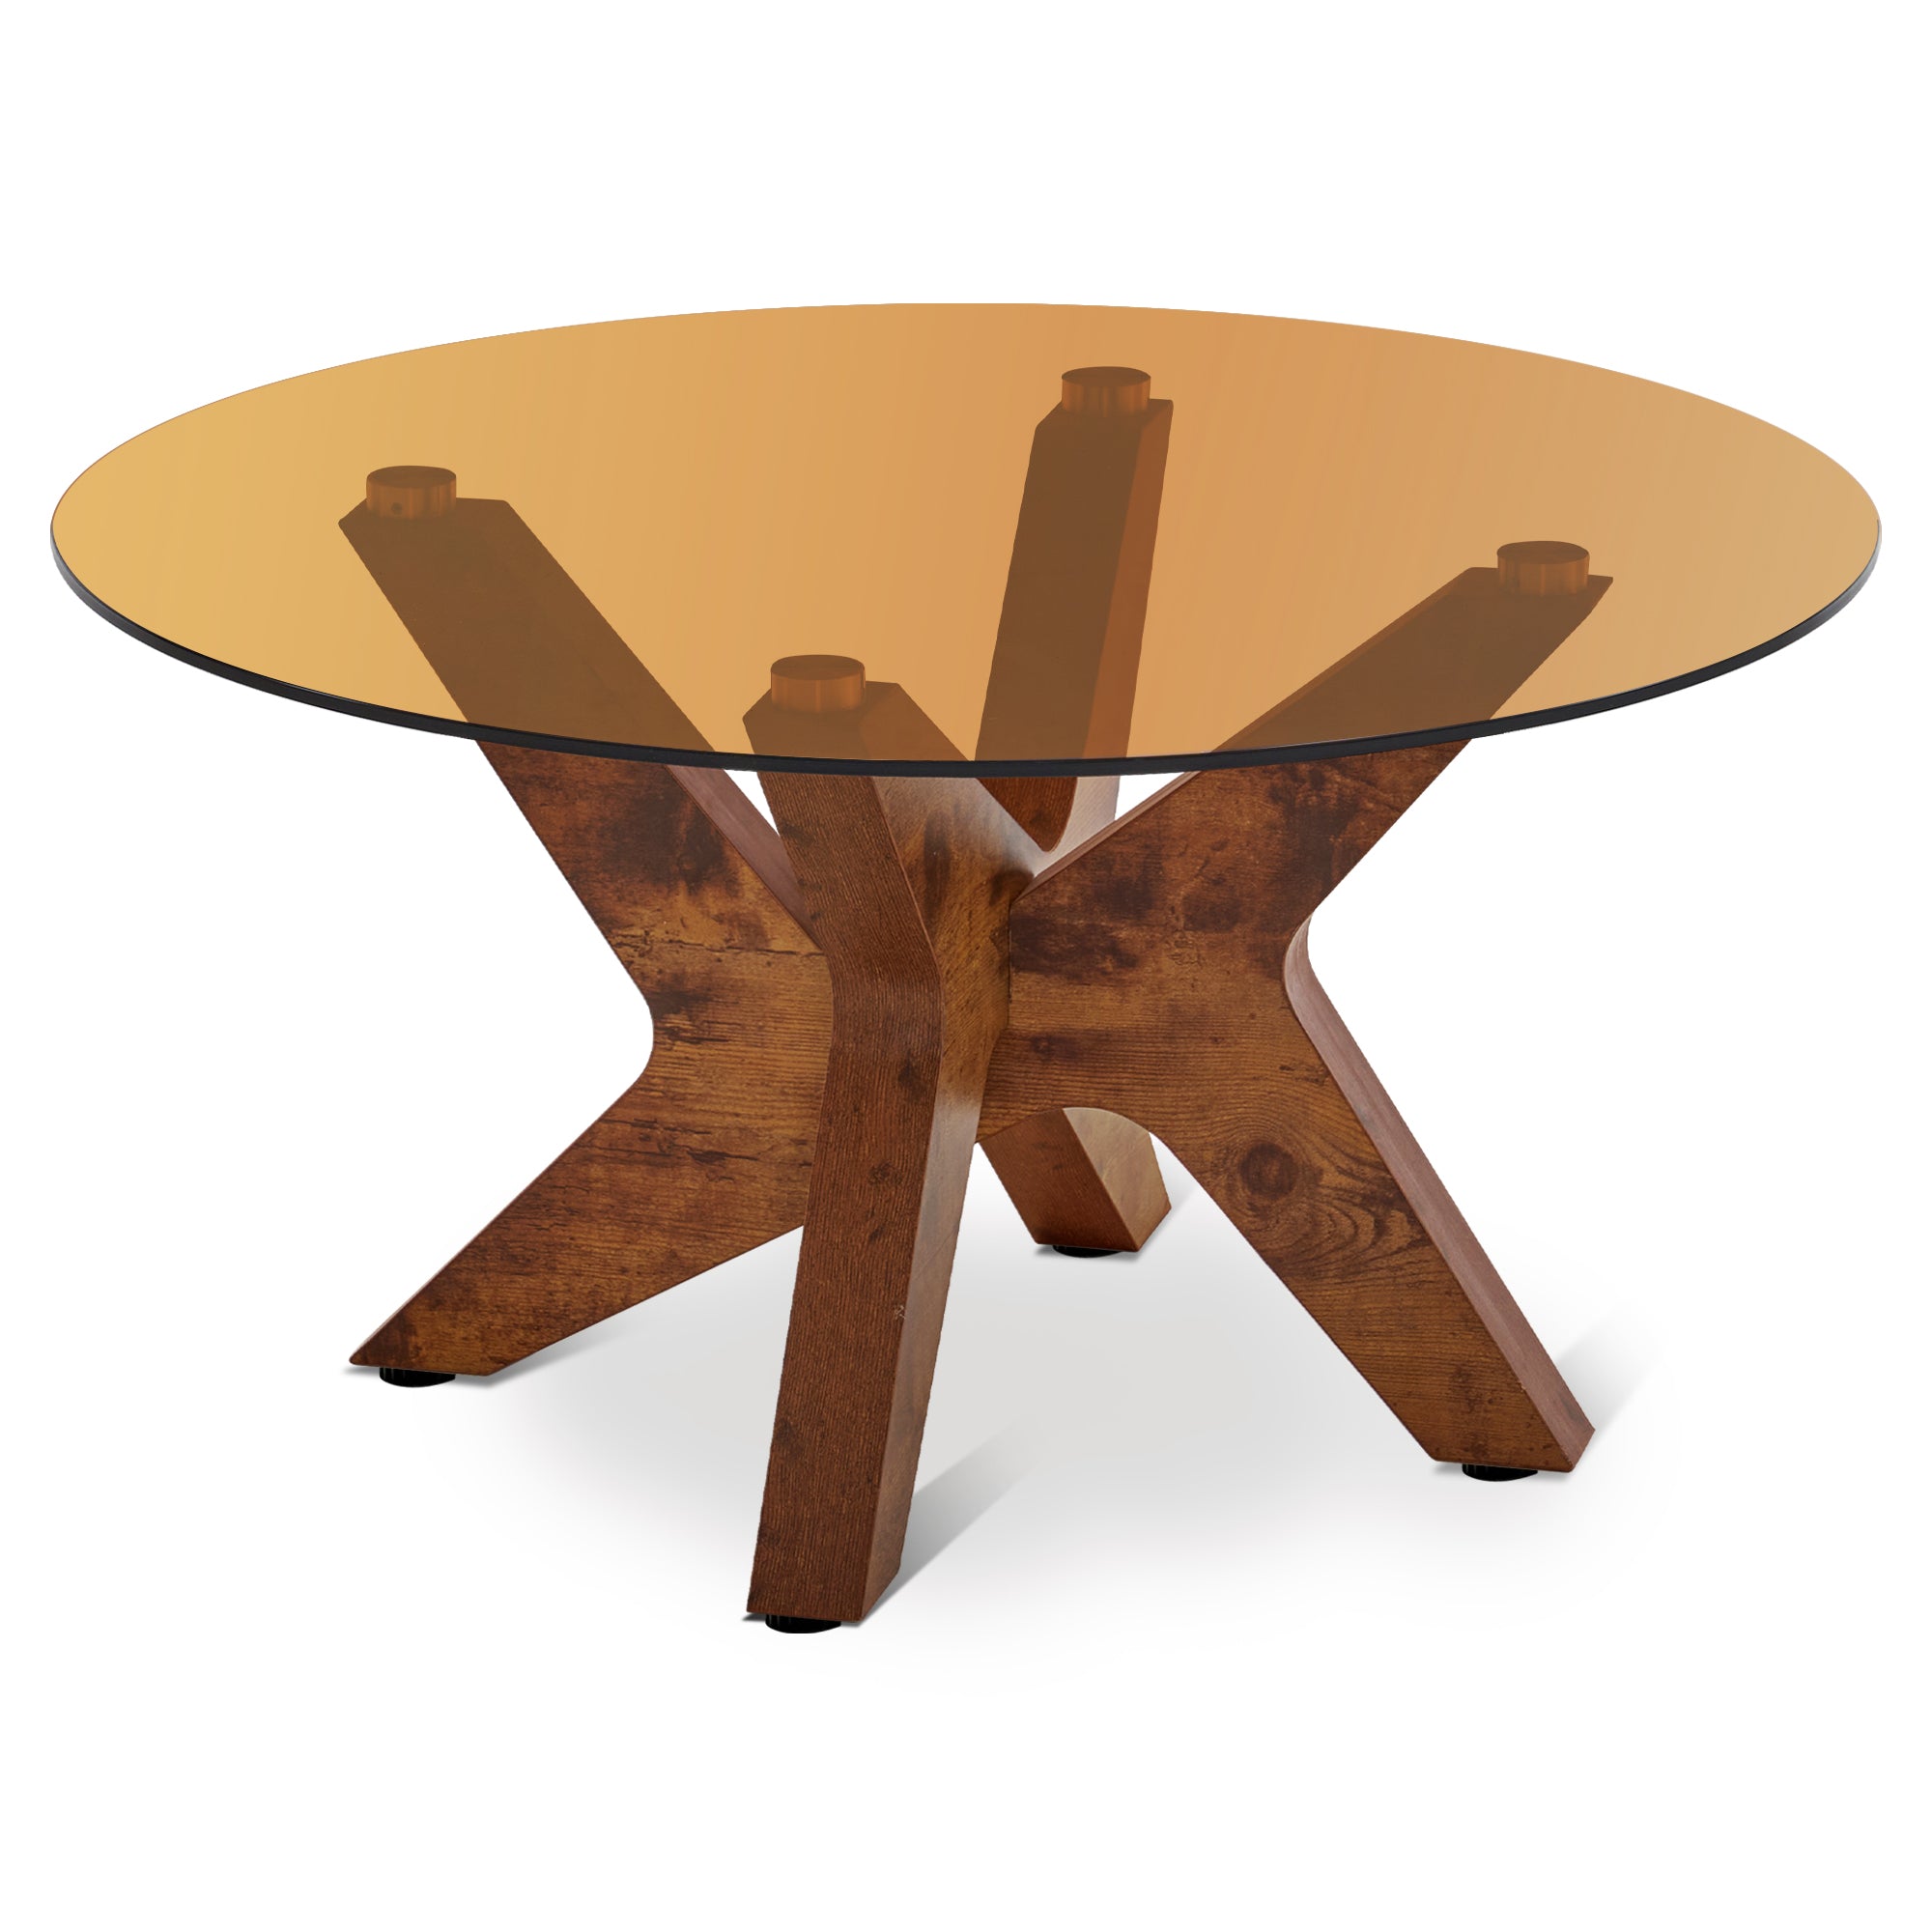 Ivinta Round Coffee Tables for Living Room, Glass Coffee Table for Home Office Cafe